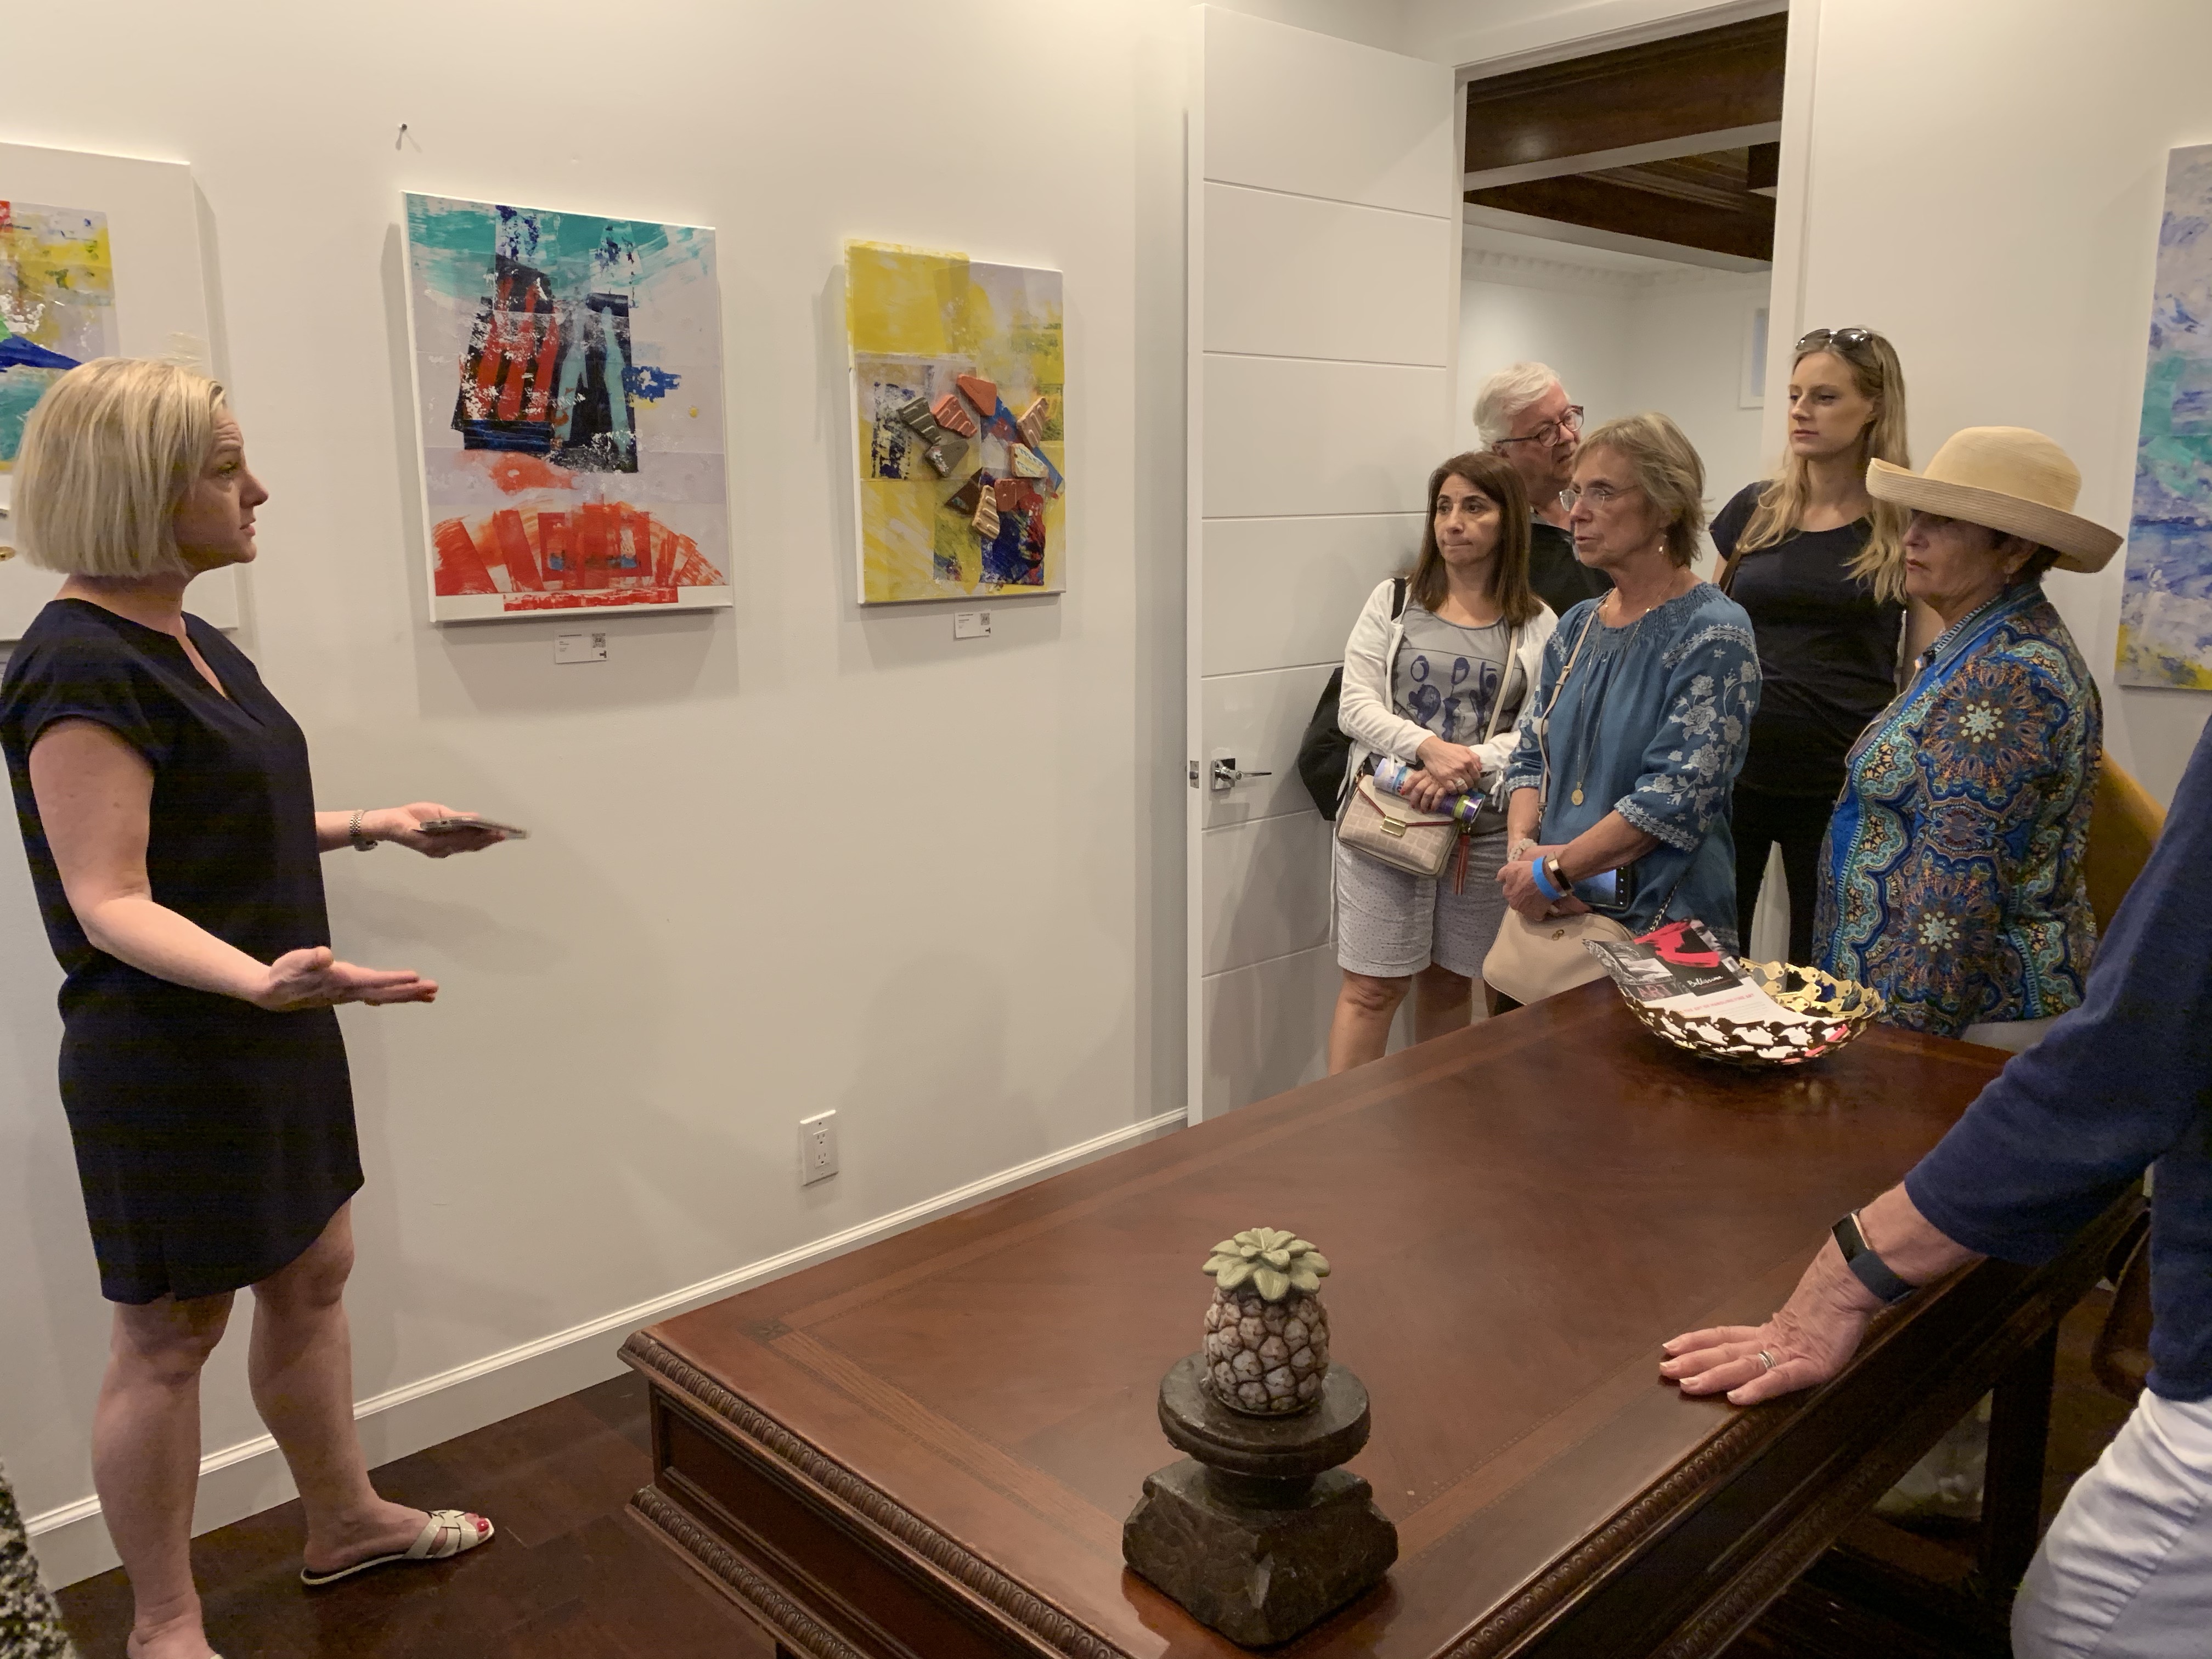 Curator, Jennifer Nayak Feldman, also known as @LasOlasLocal, speaks to a group of attendees about the art promoting the theme 'Resiliency of the Bahamian Spirit' .